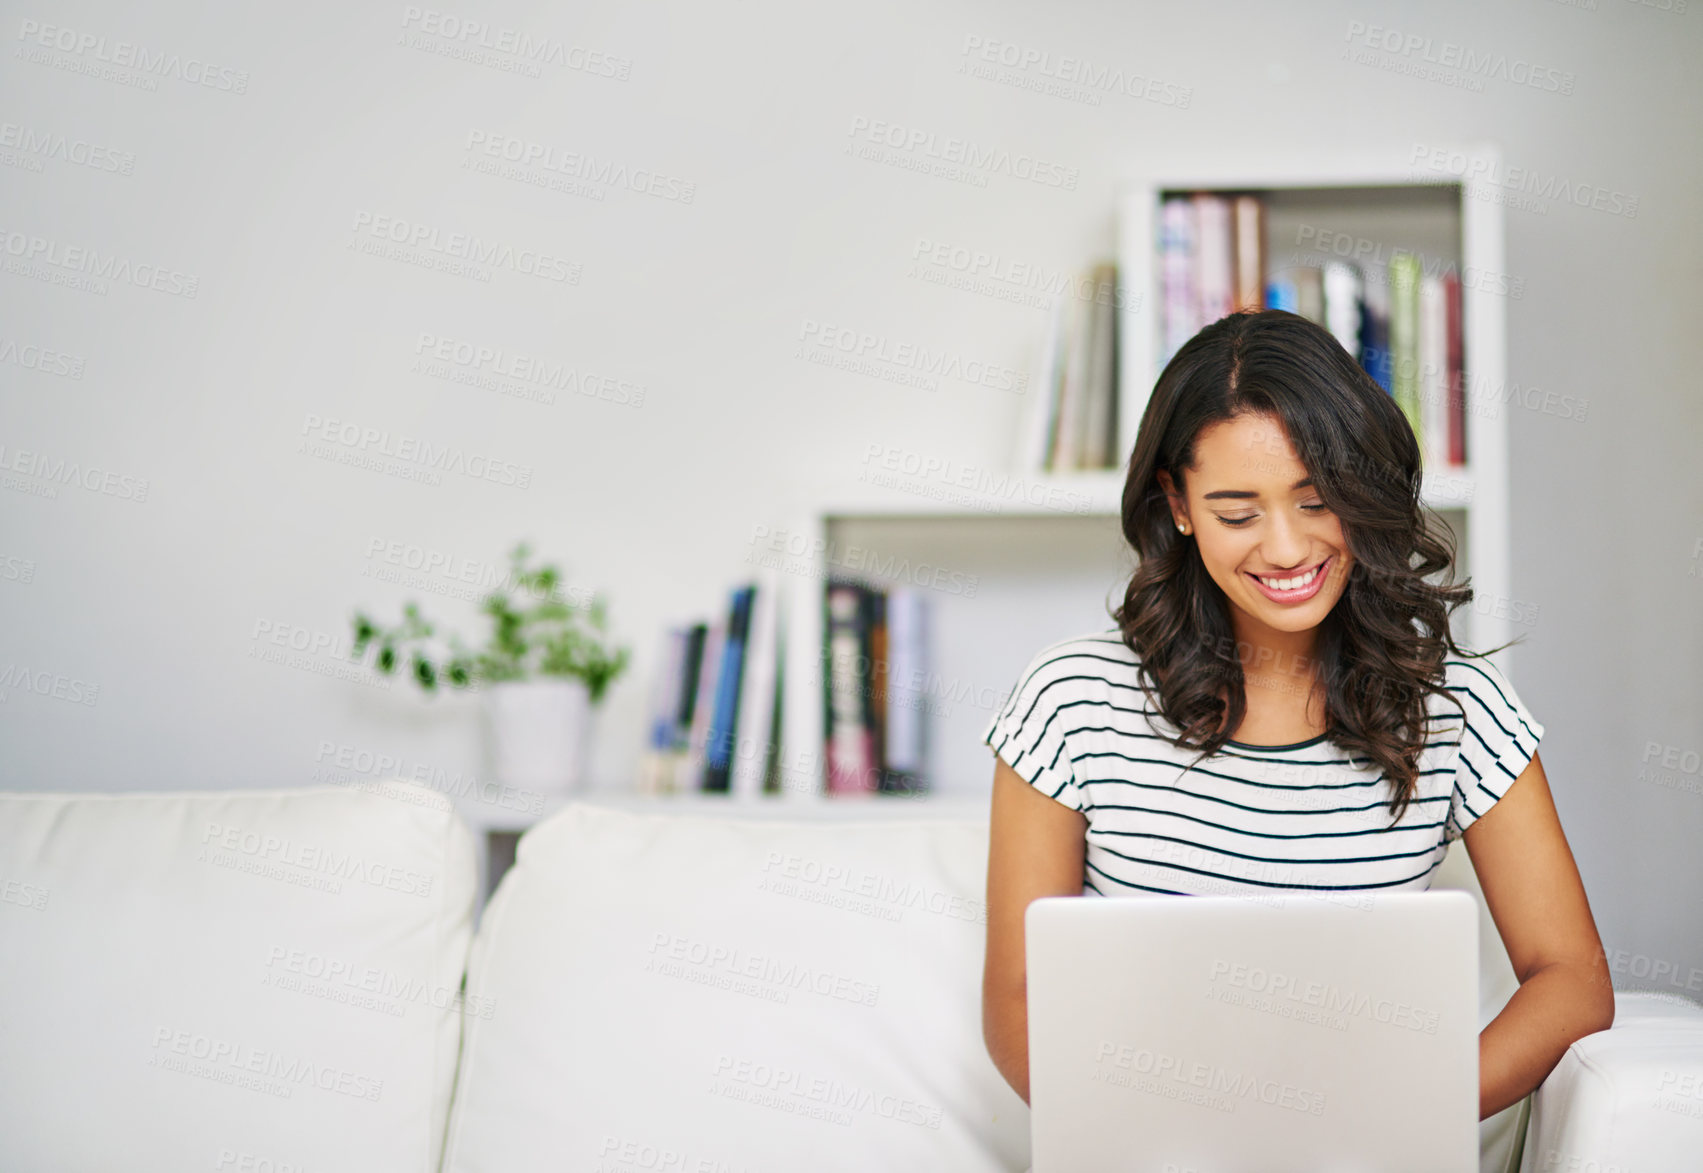 Buy stock photo Cropped shot of a young woman using her laptop while relaxing on her sofa at home